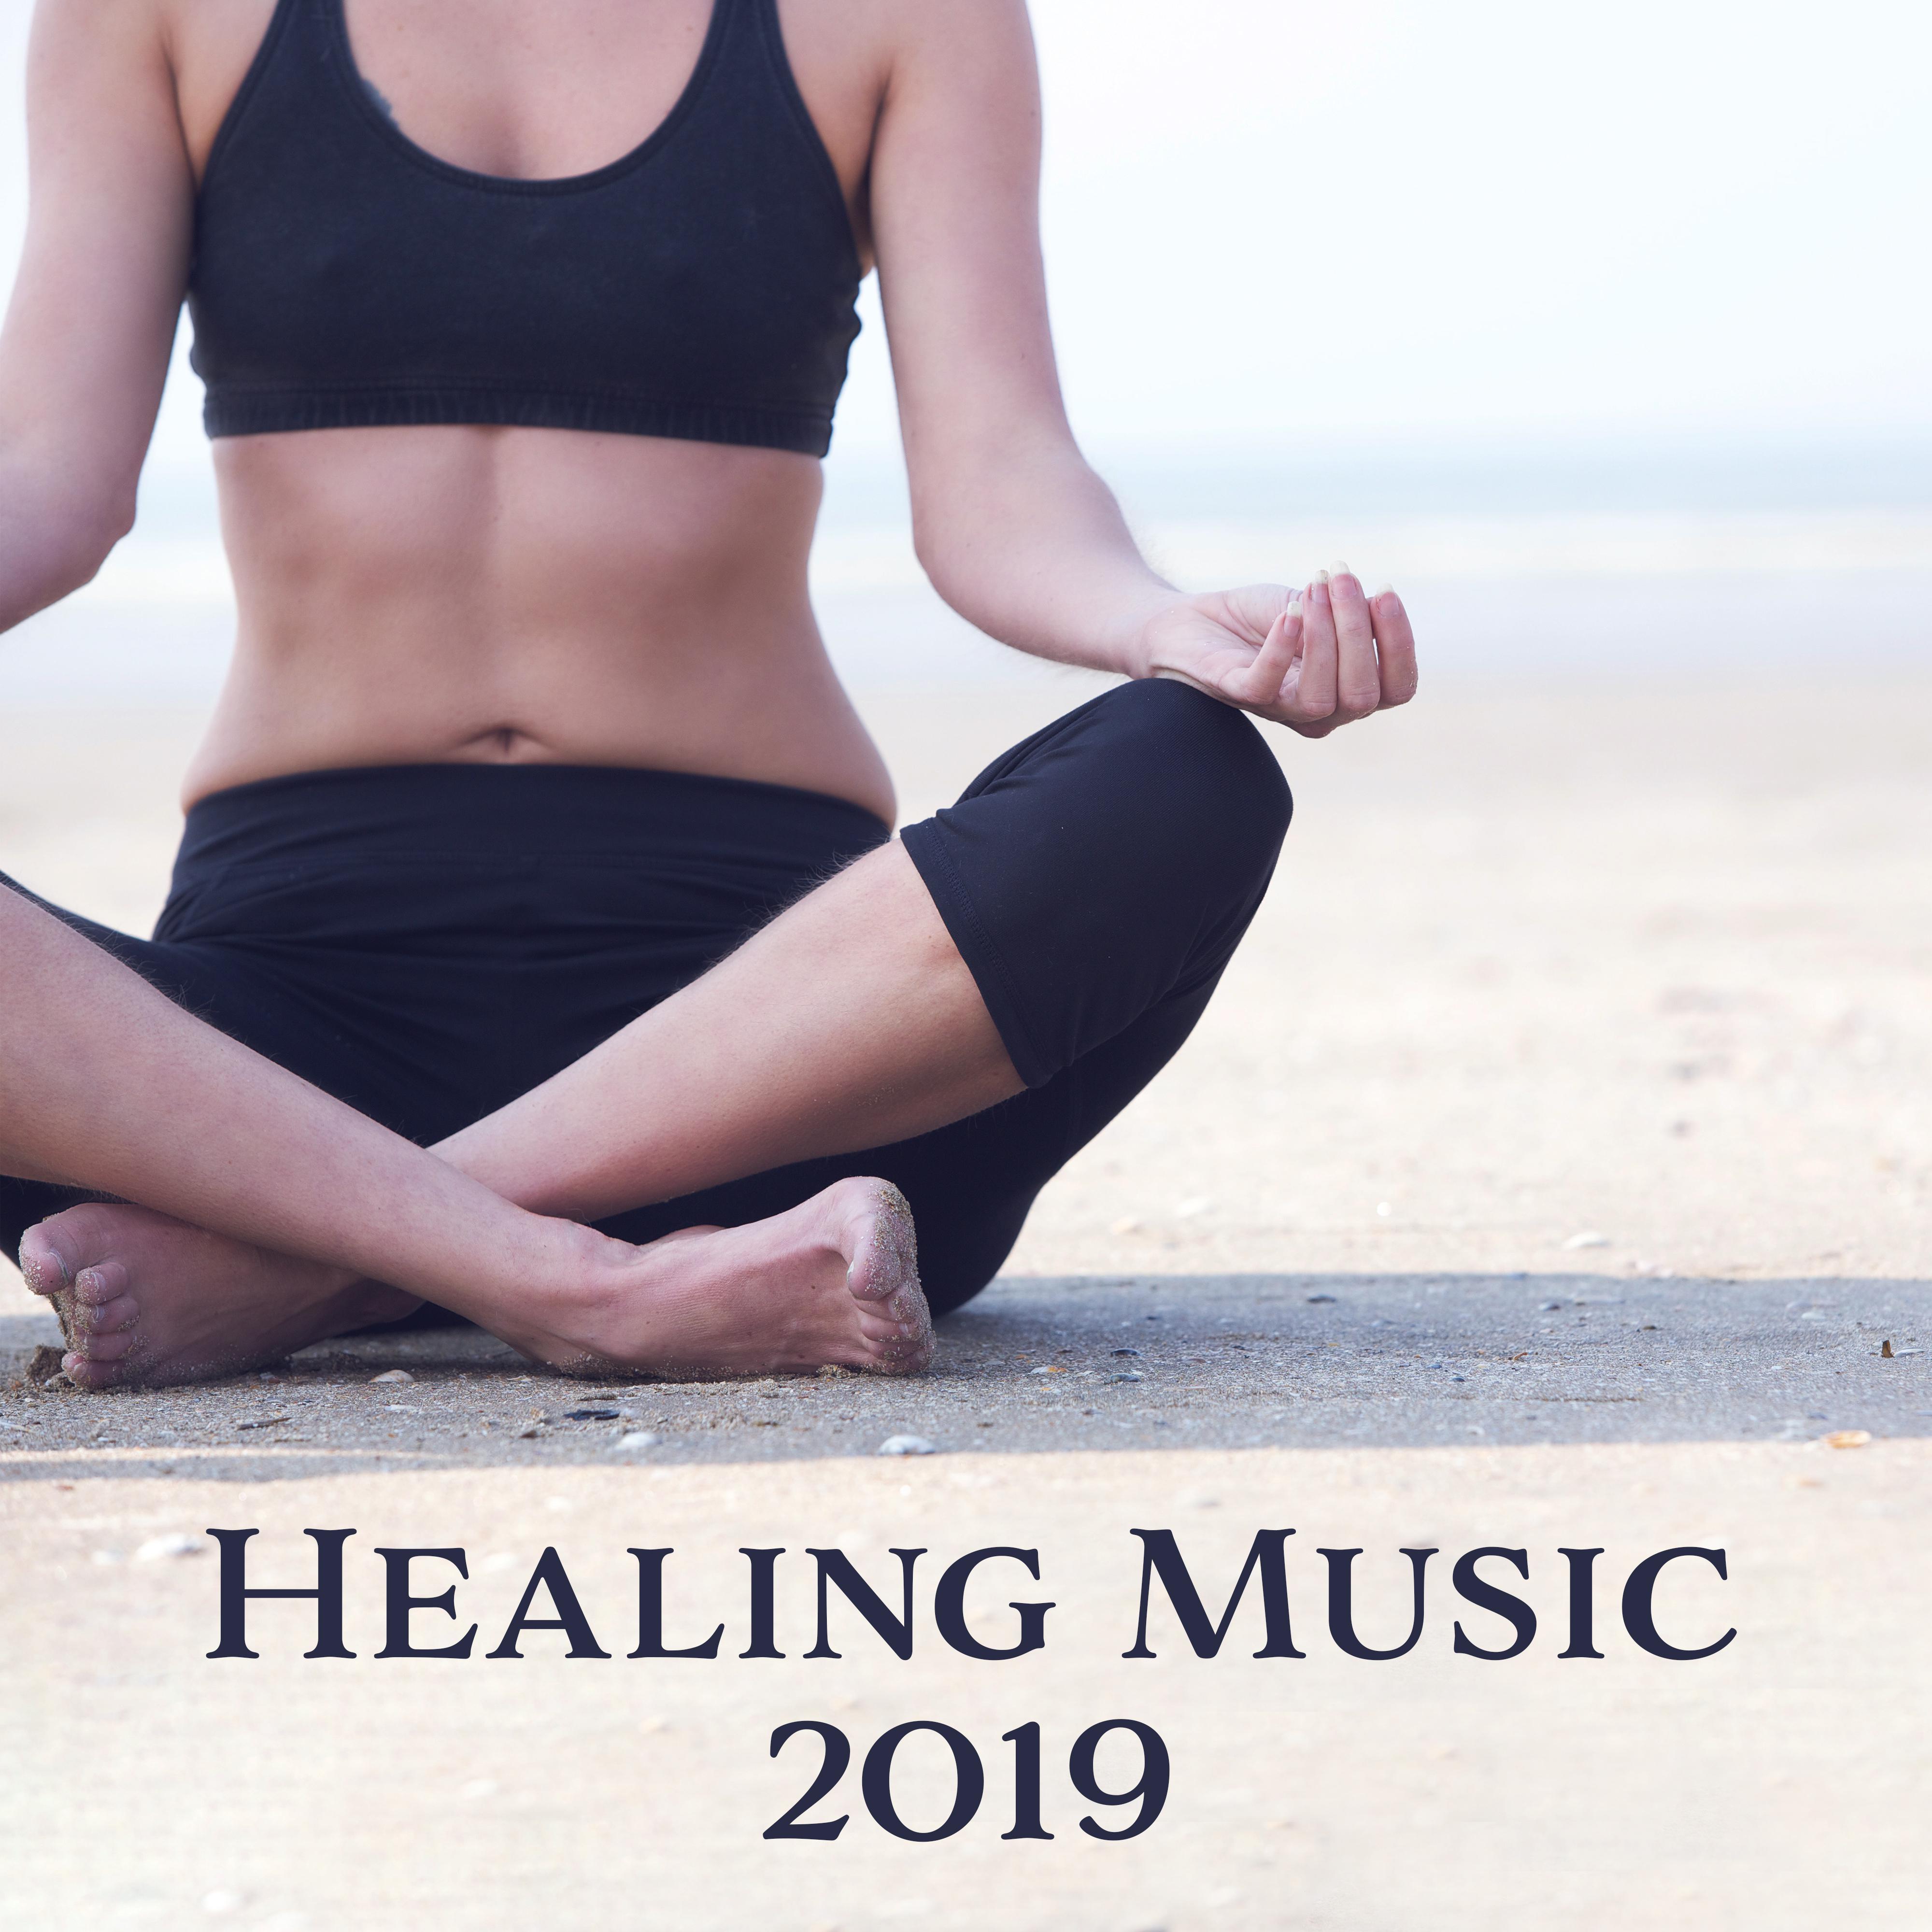 Healing Music 2019 – Soothing Nature Sounds for Relaxation, Spa, Sleep, Deep Meditation, Relax Zone, Calm Down, Pure Zen